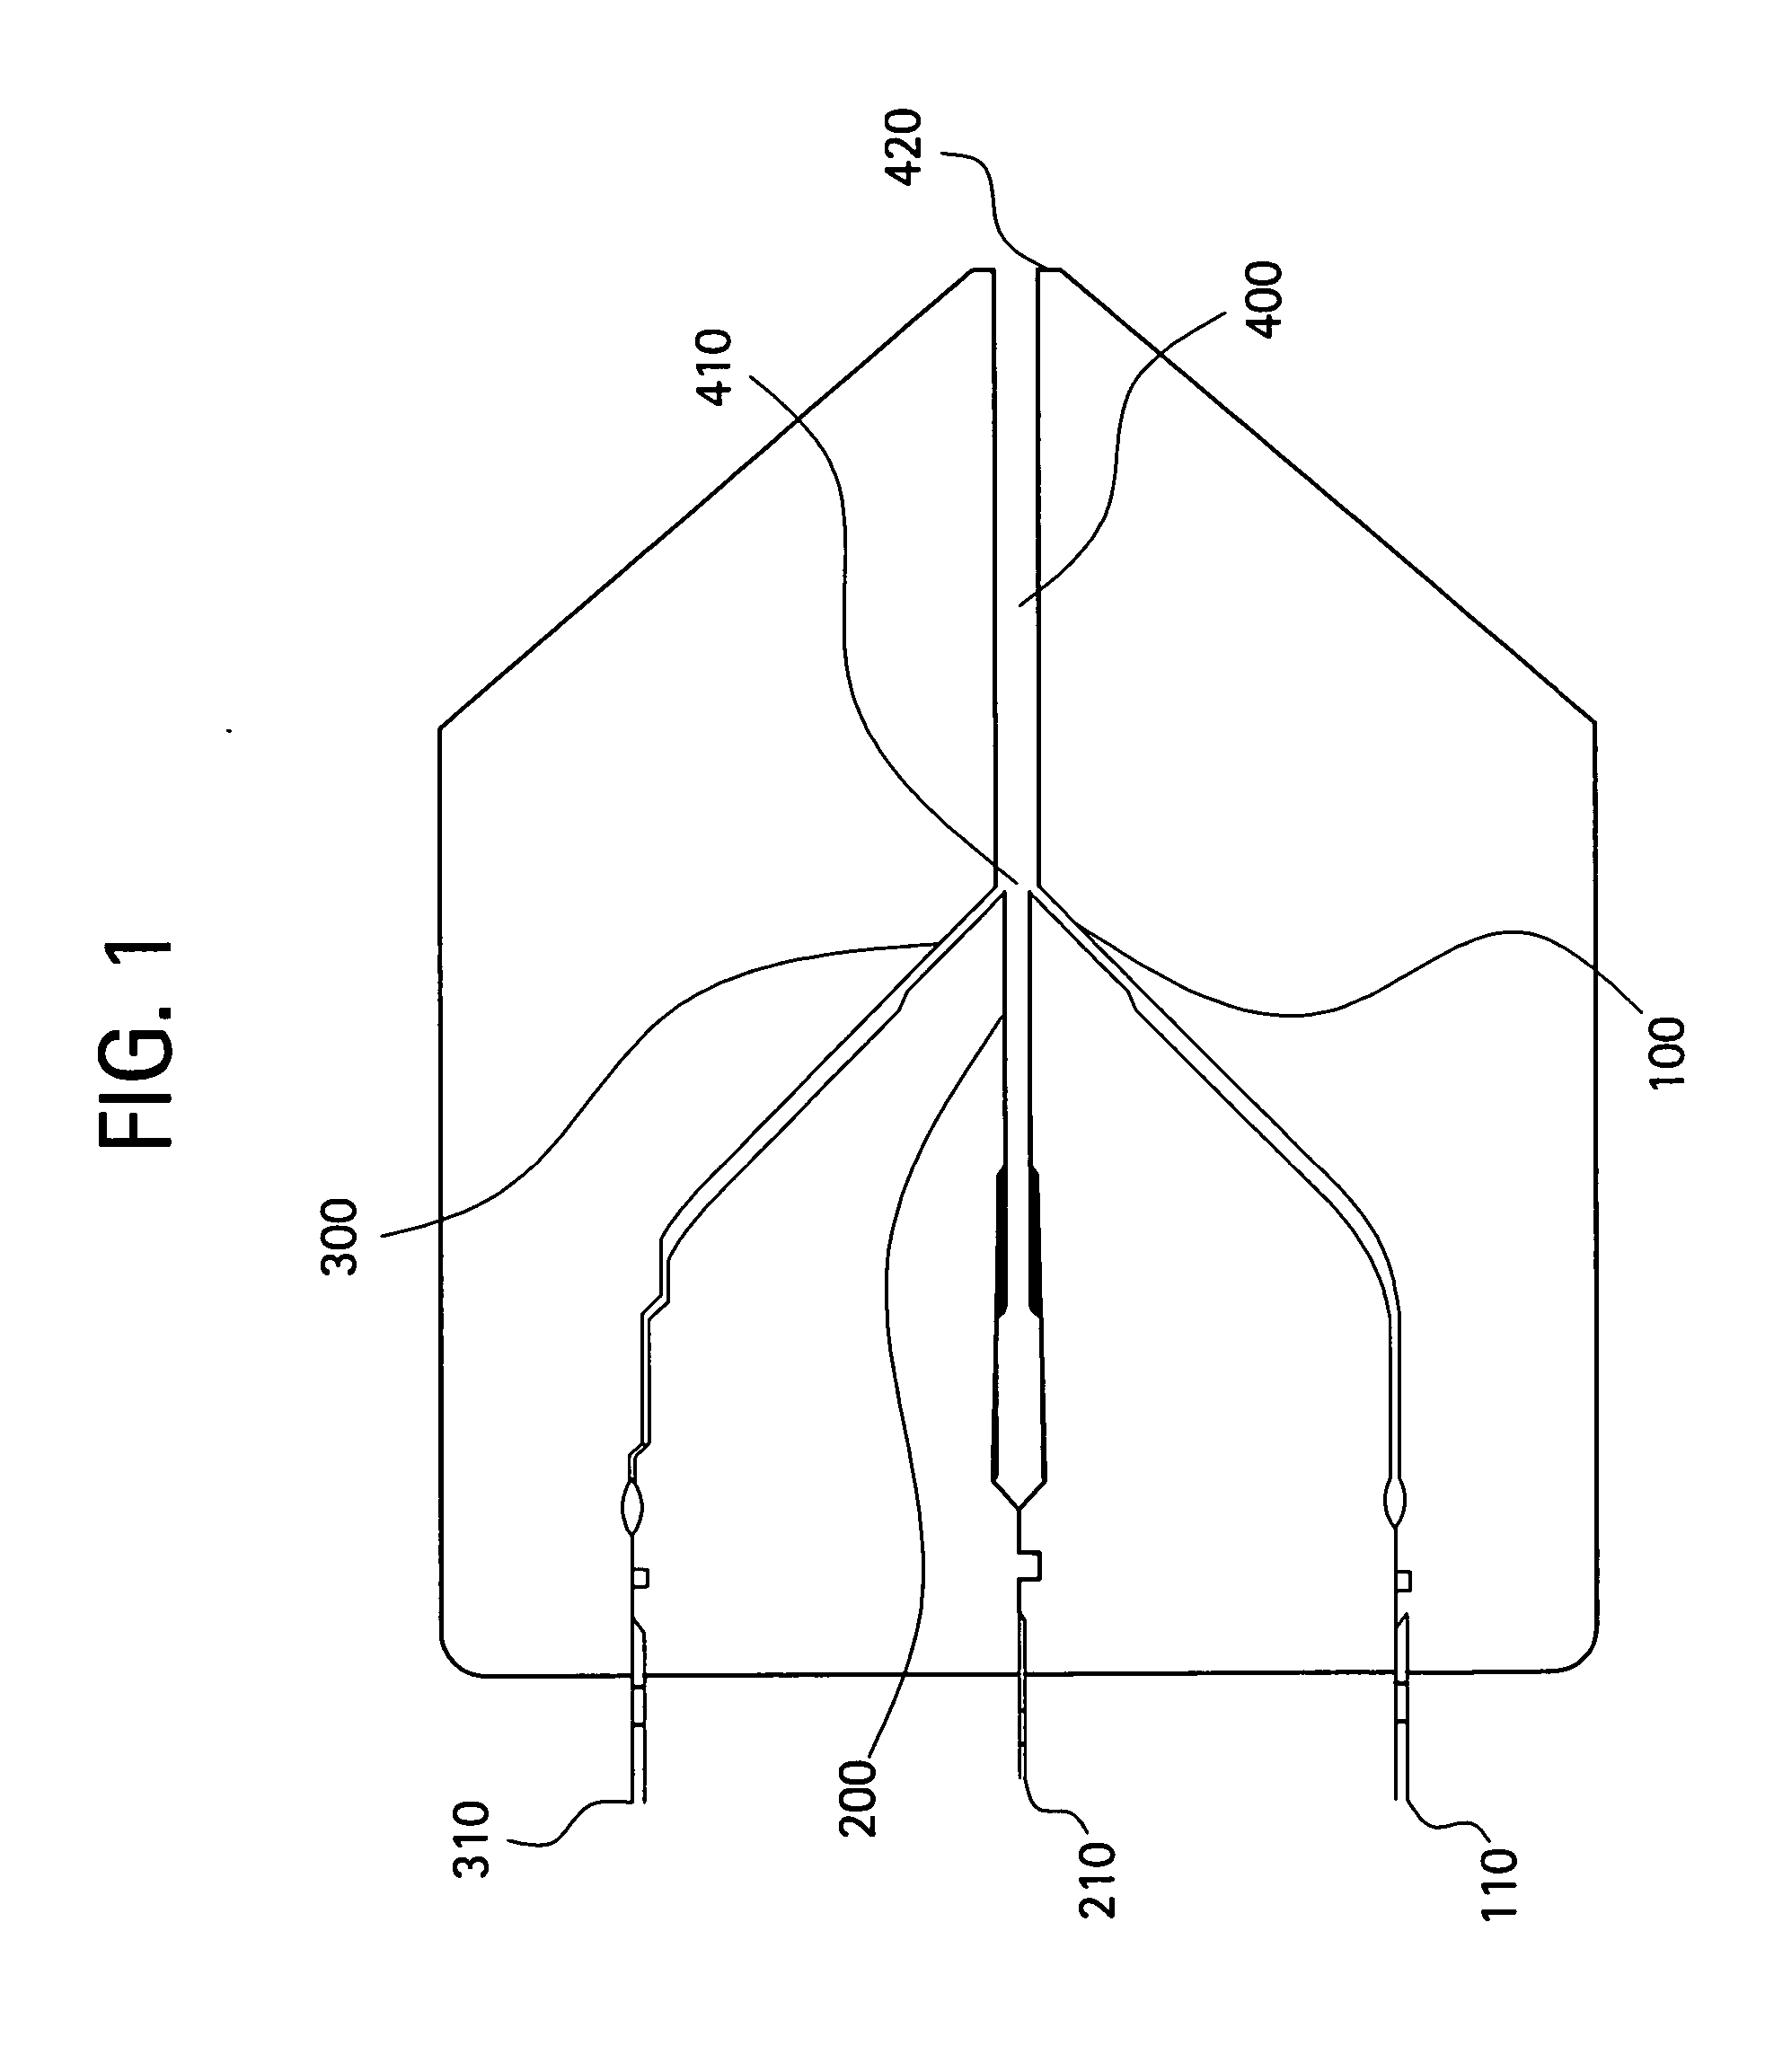 Multilayer thermoplastic films and methods of making